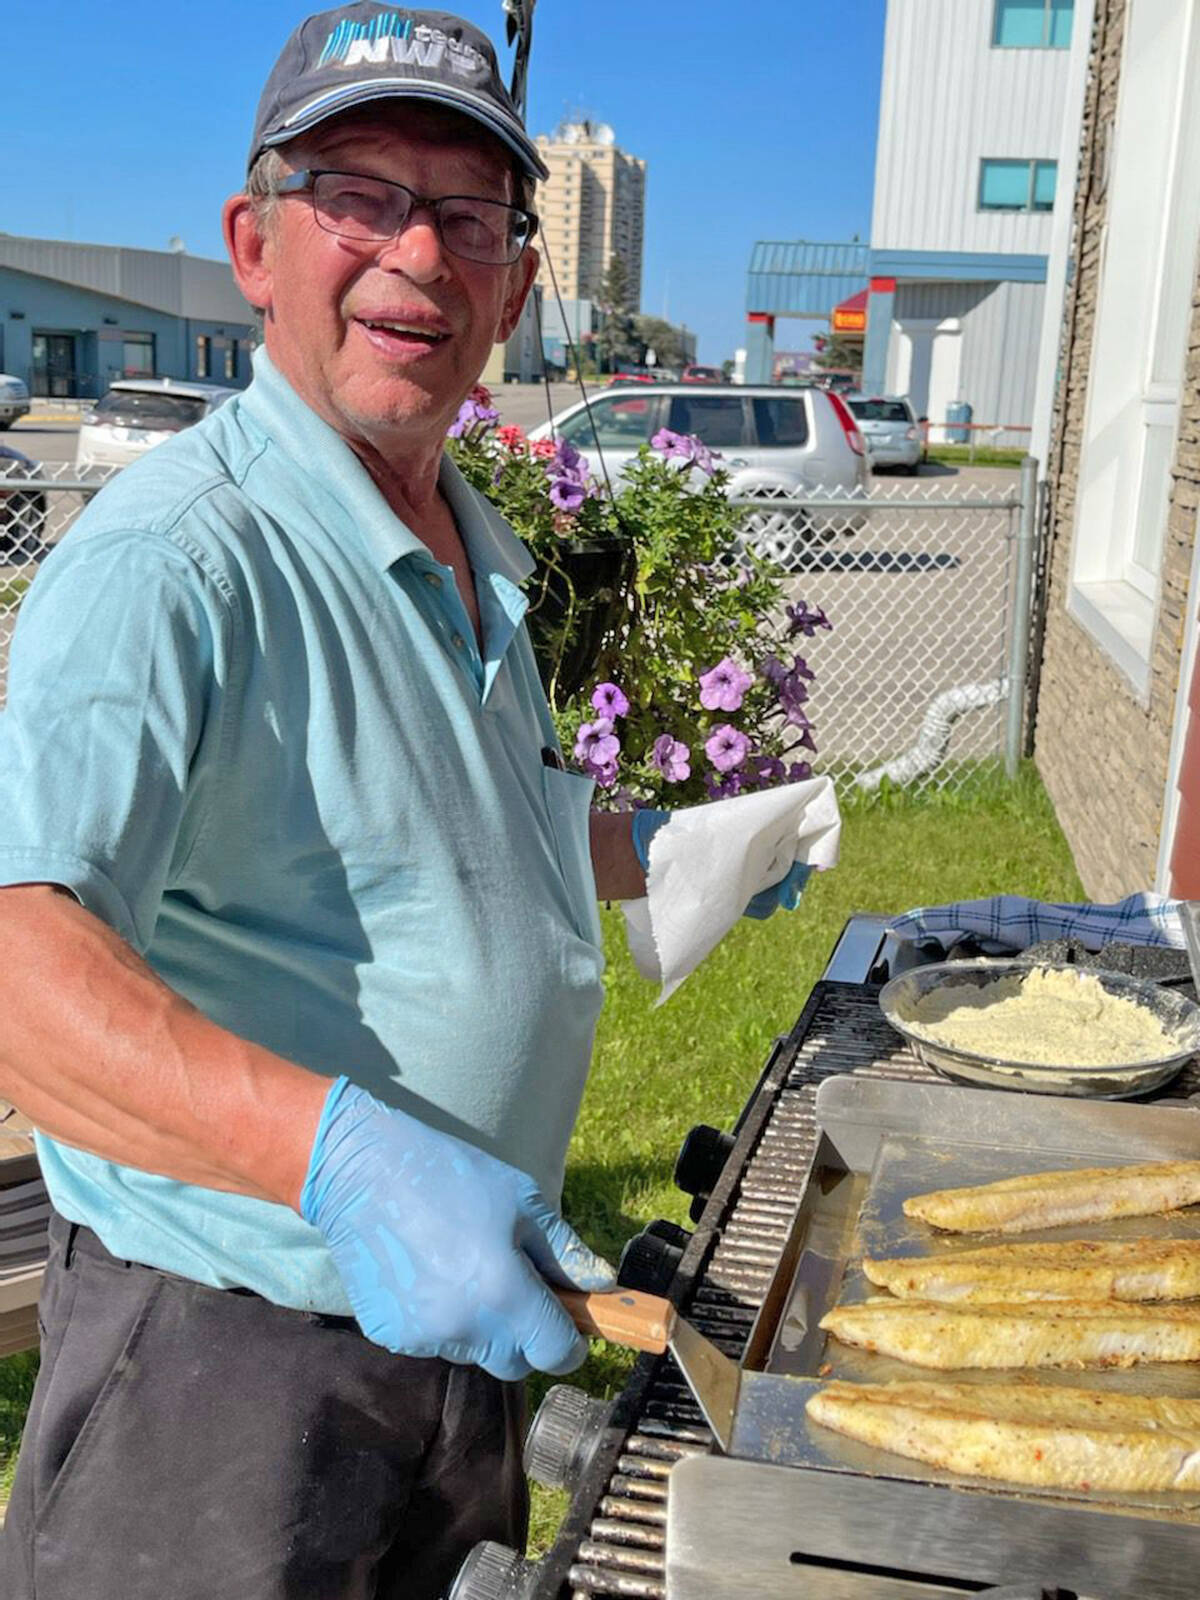 Tom Makepeace, chair of the Hay River Seniors Society grills fish under the sun July 31. The group was celebrating the completion of upgrades to the Alice Cambridge Room at the Whispering Willows seniors complex. The upgrades included a handwashing station, which was the only critical deficiency identified in an inspection for a food preparation permit Feb 14, 2020. Photo courtesy of Sandra Lester